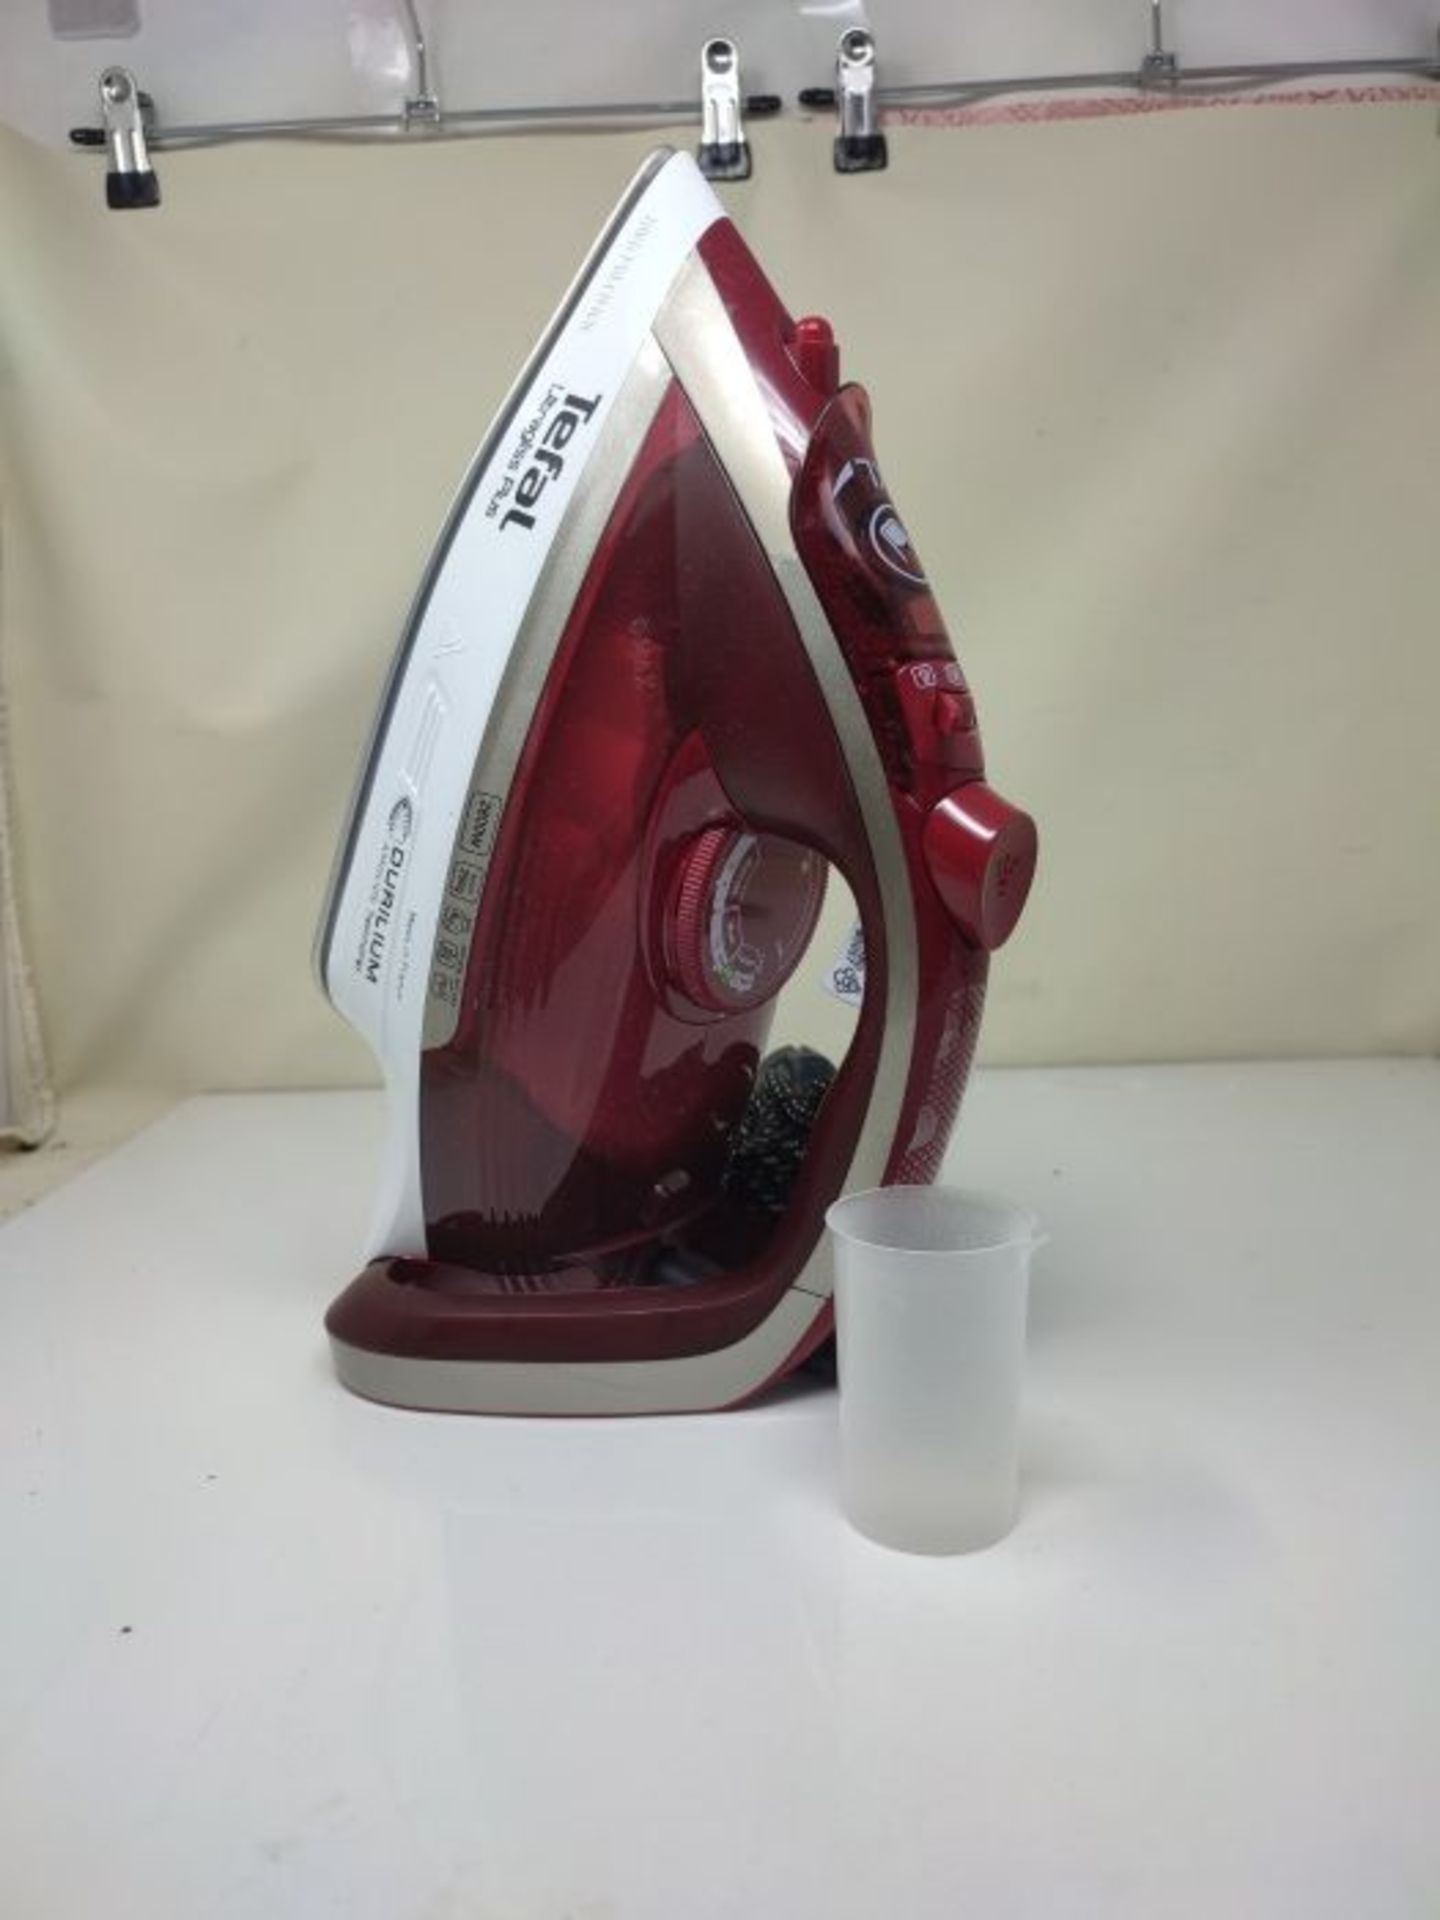 Tefal FV6810 Ultragliss Plus 2800 Steam Iron, Red/White - Image 3 of 3